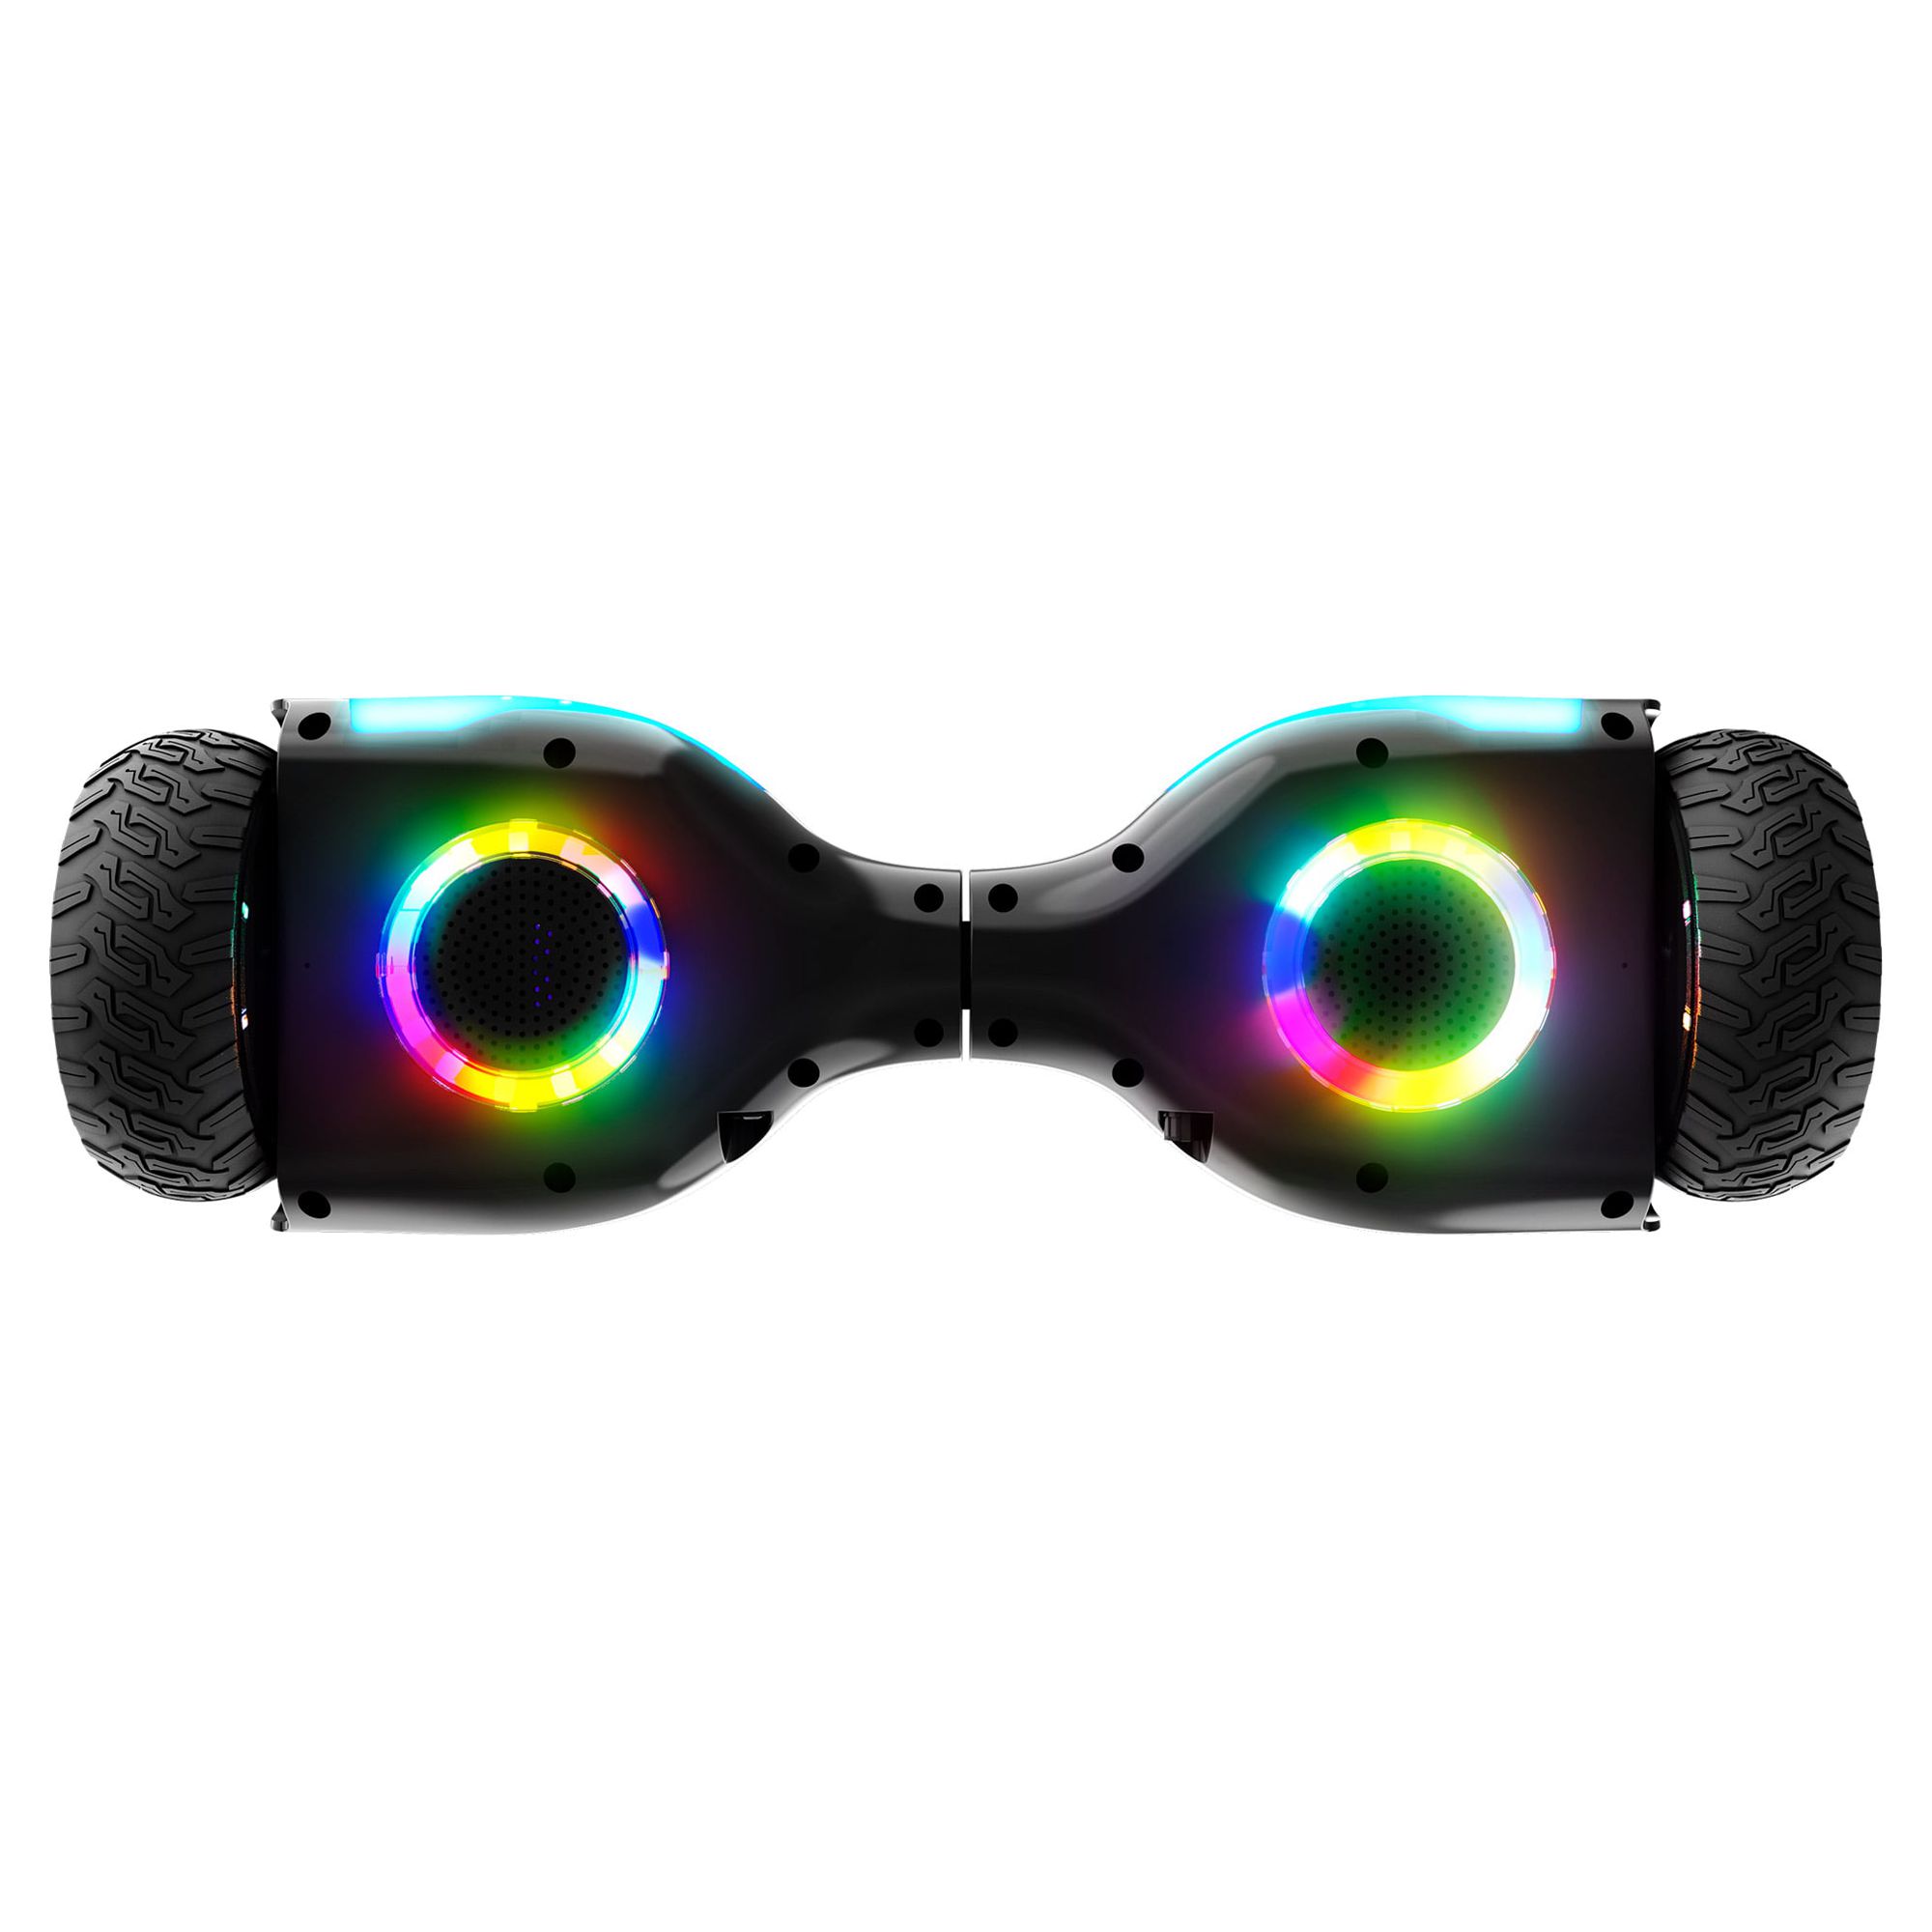 Swagtron Warrior T580 Hoverboard 220 Lbs Black Music-Synced Bluetooth LED Lights 7.5 Mph LiFePo Battery UL-Compliant - image 8 of 9